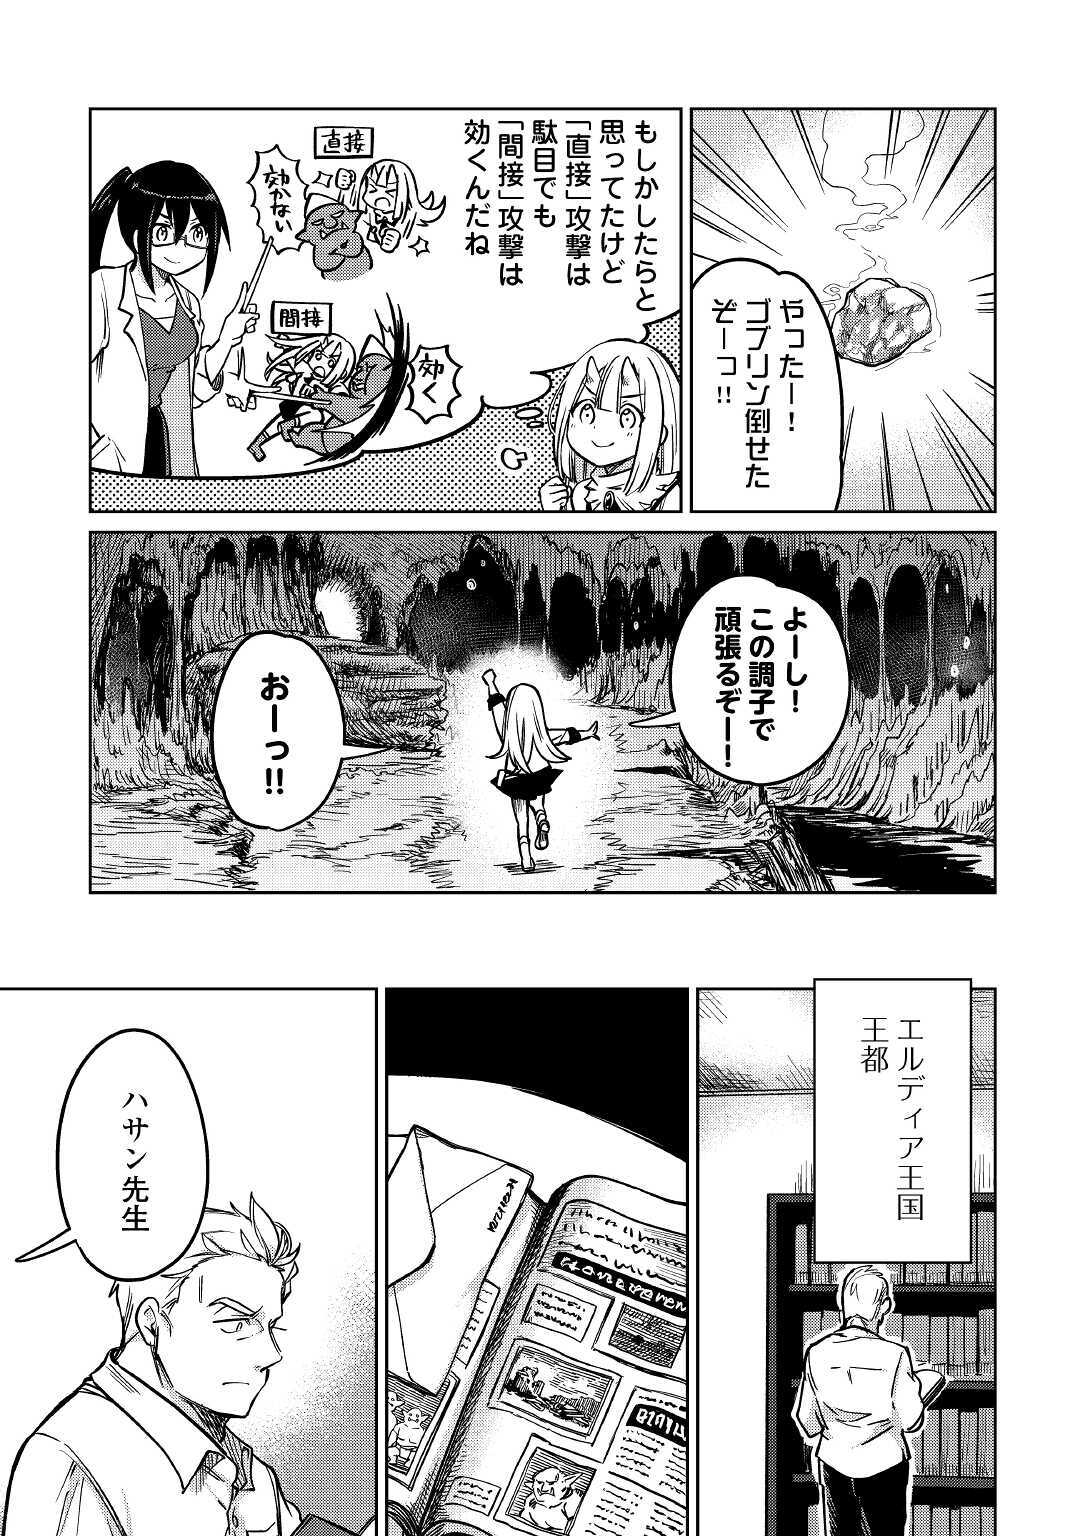 The Former Structural Researcher’s Story of Otherworldly Adventure 第28話 - Page 9